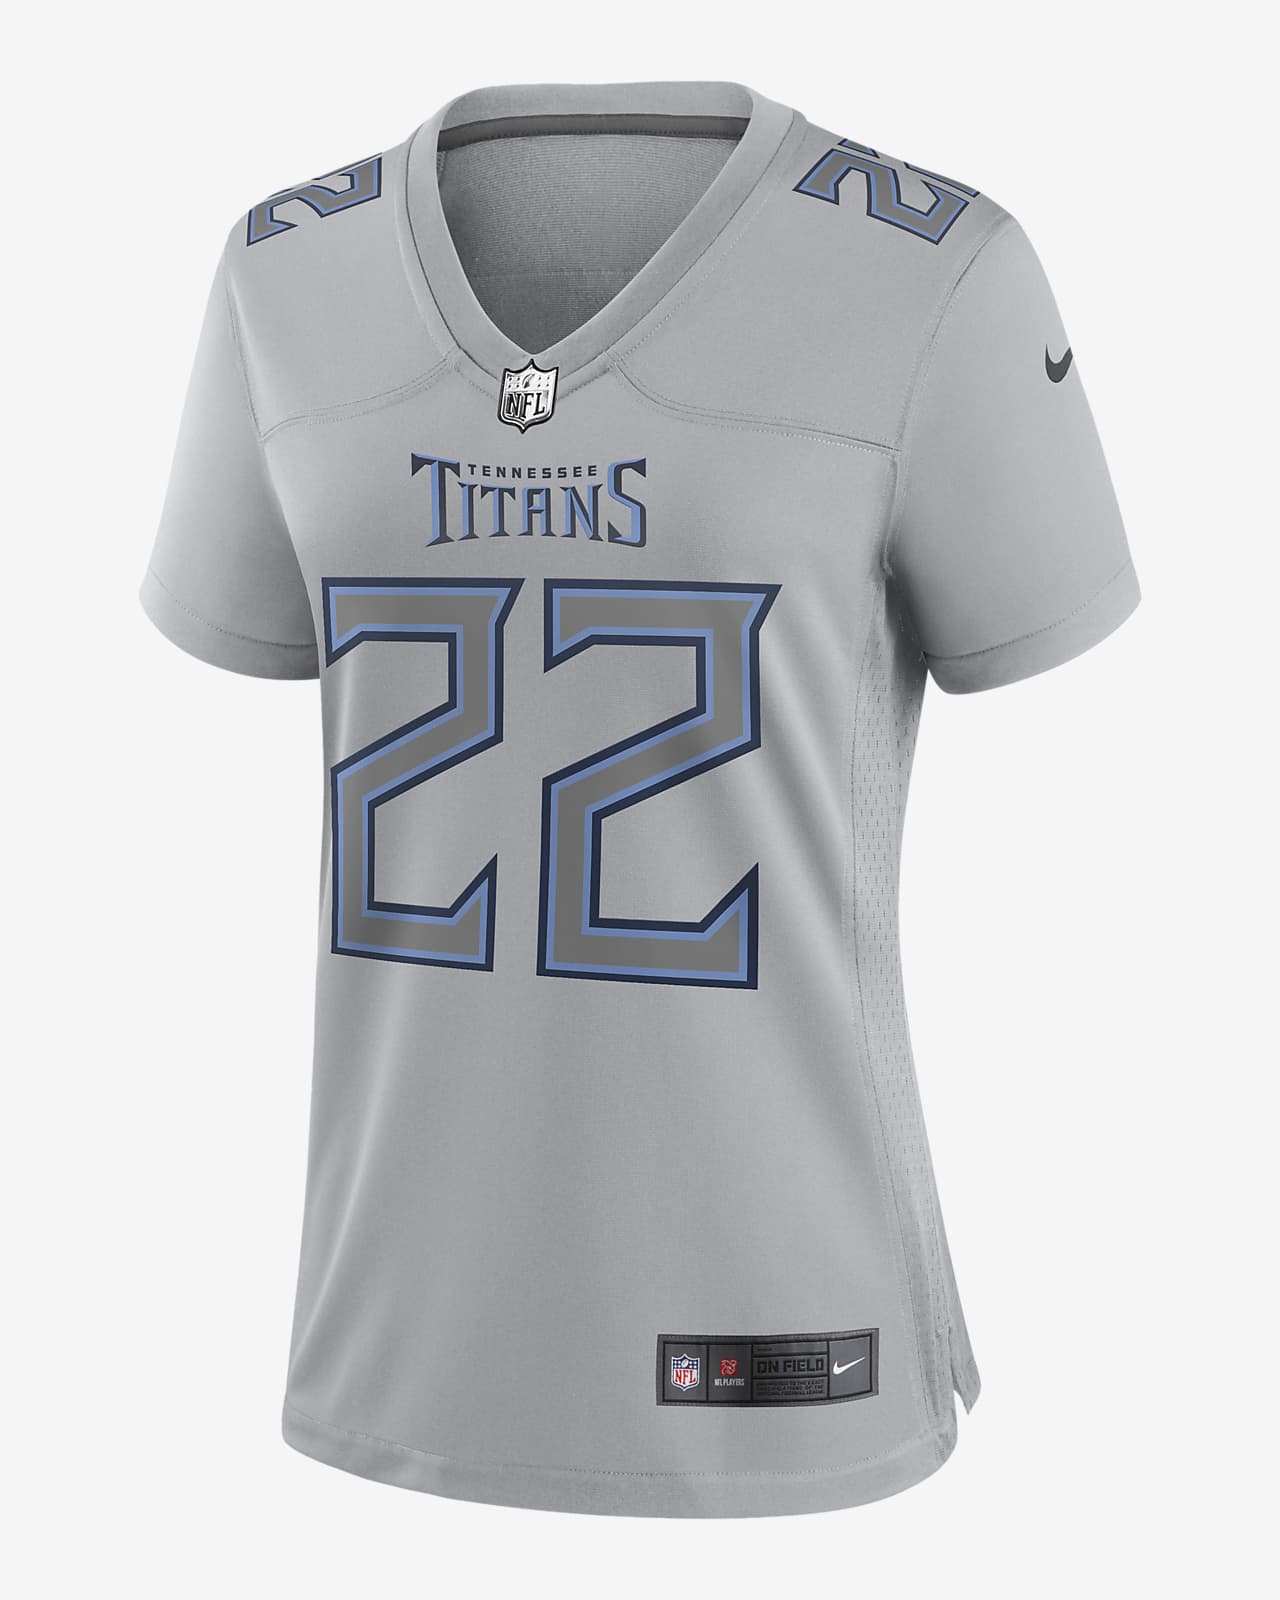 Jersey de fútbol americano Fashion para mujer NFL Tennessee Titans Atmosphere (Derrick Henry)